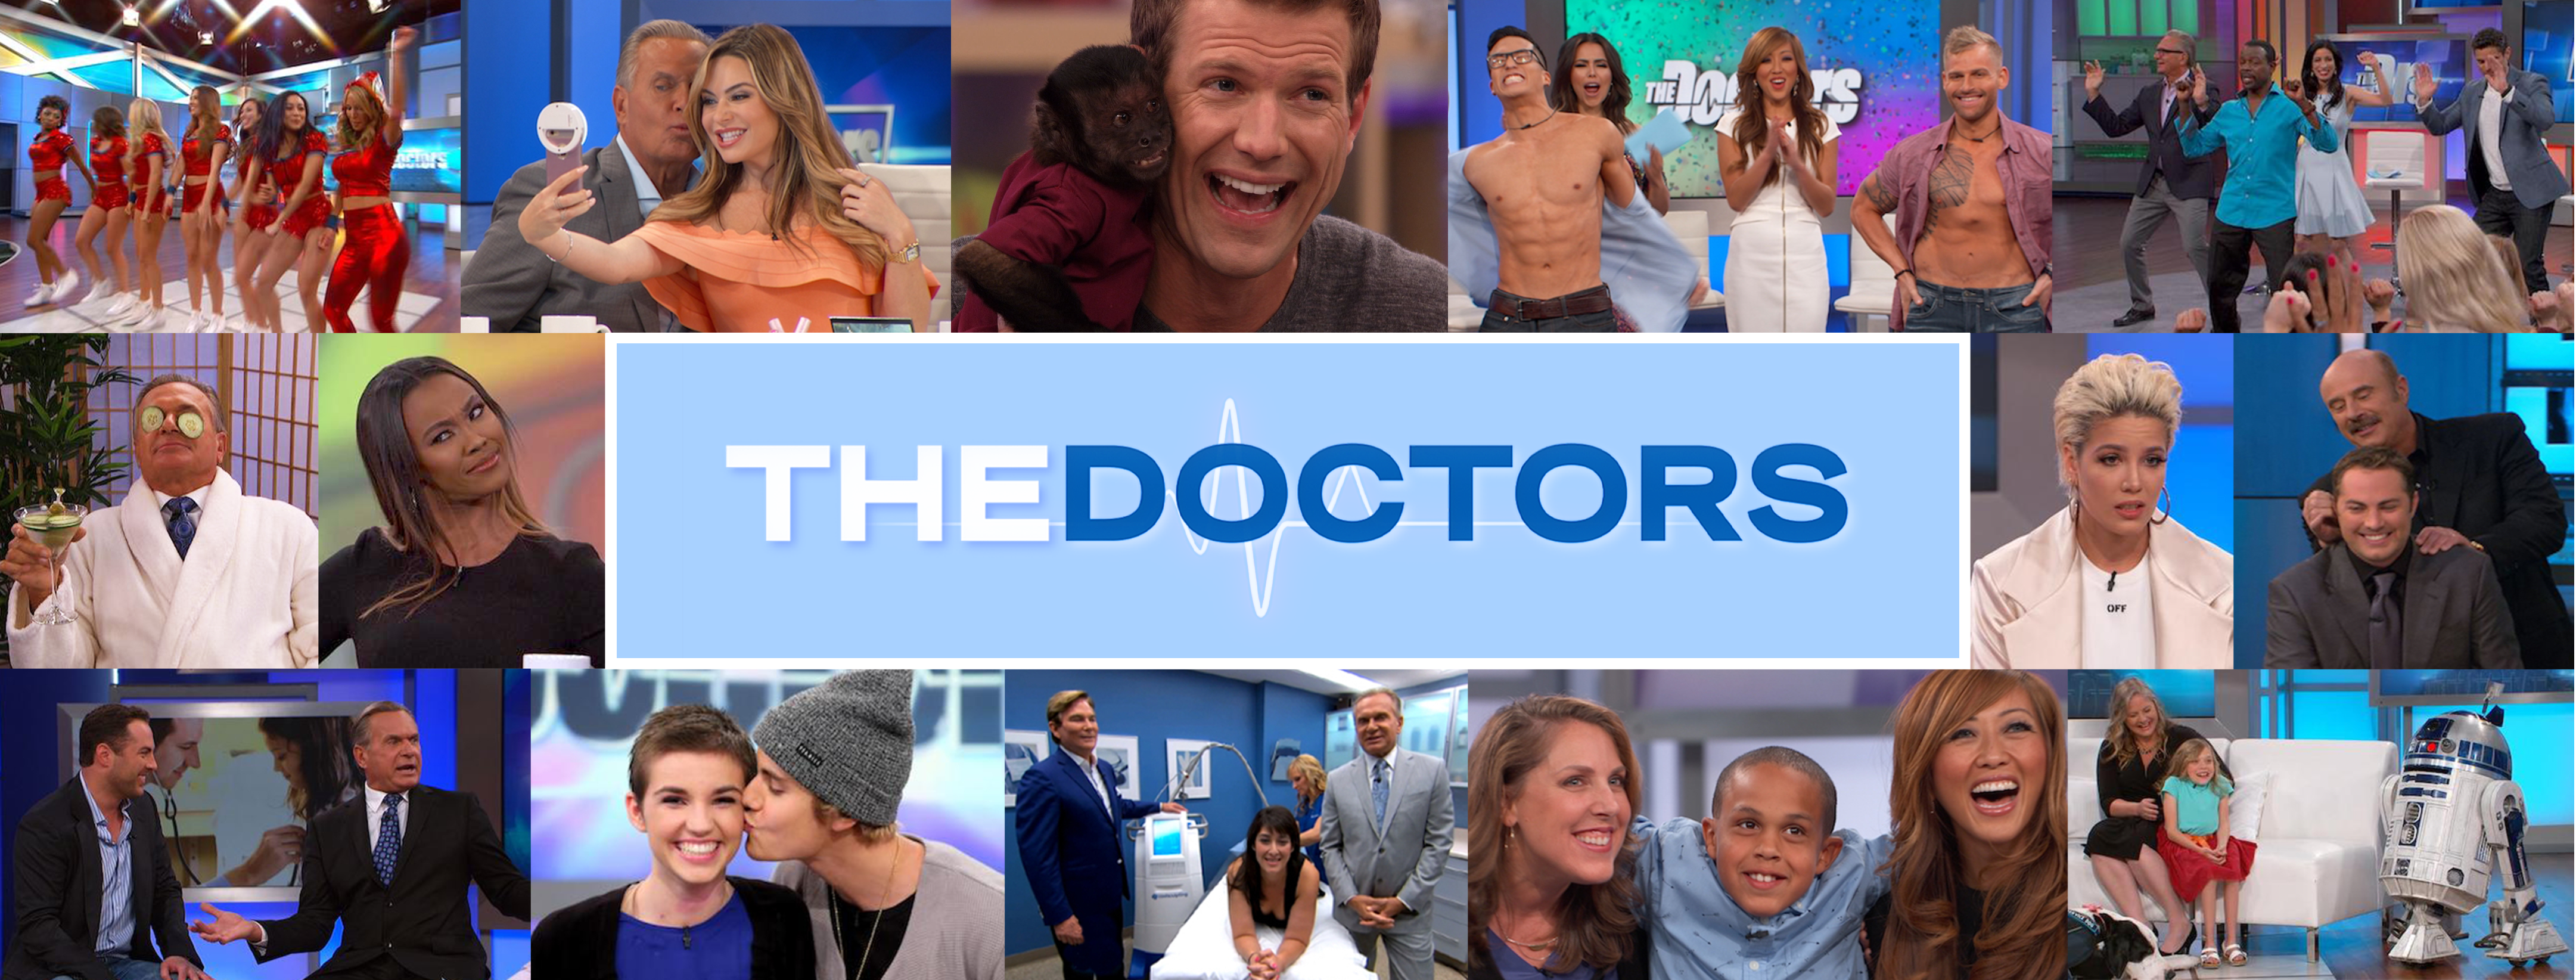 Dr Travis Most Embarrassing Moment The Doctors Tv Show